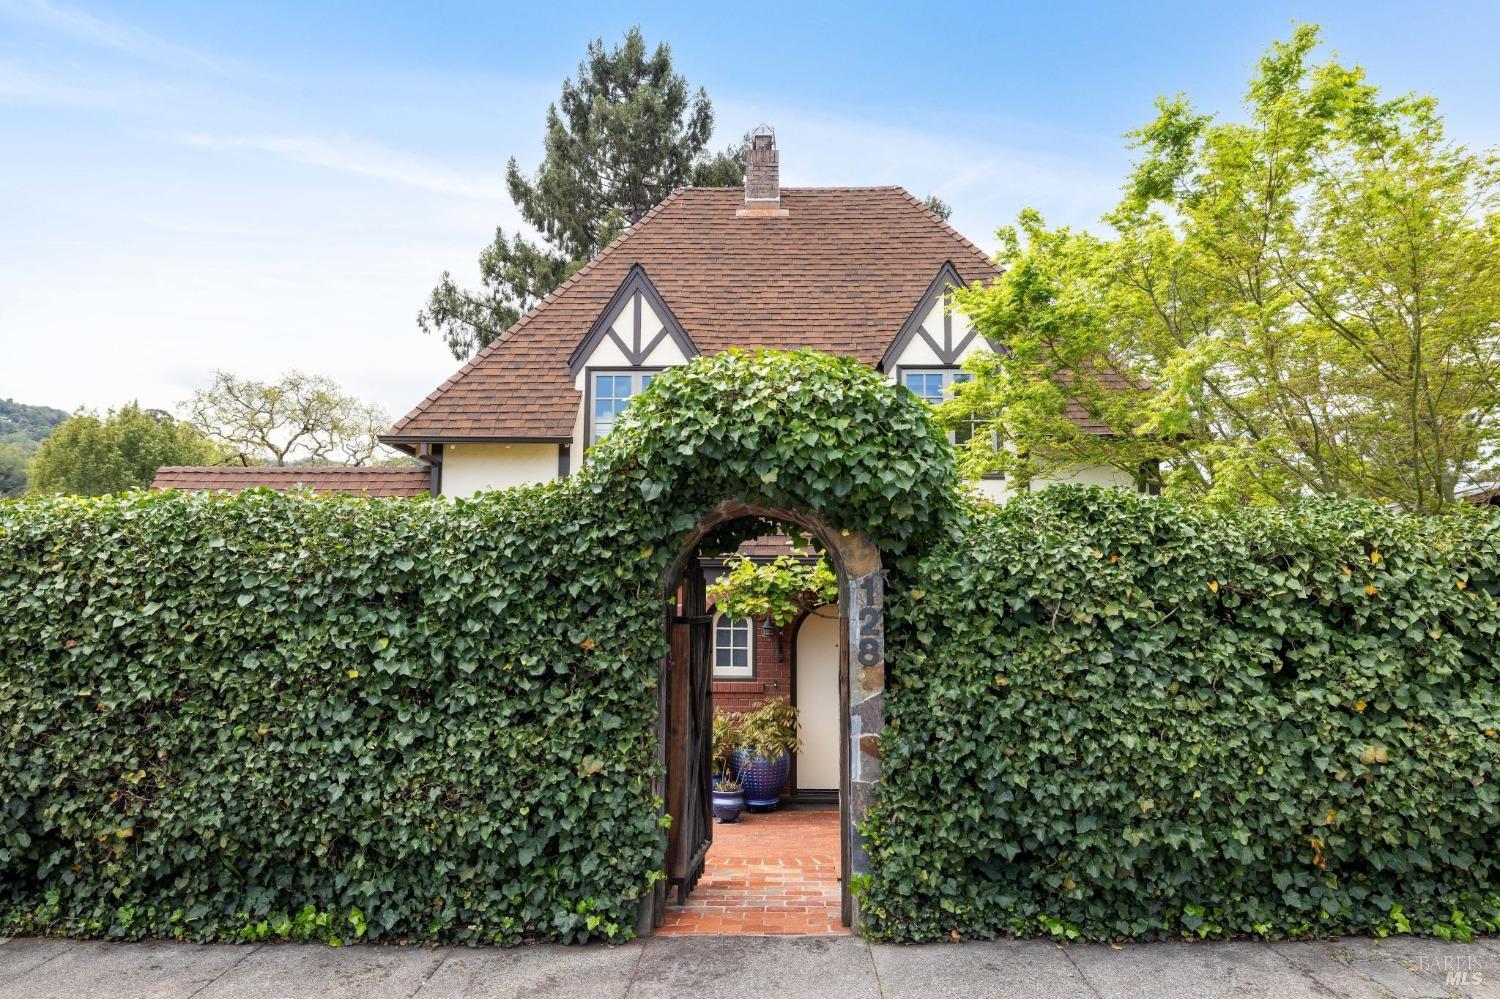 This 1924 vintage home on a classic heritage street is a delightful blend of old world character and modern conveniences. Calumet runs along the original Sais land grant, an easy stroll to old town San Anselmo via Nokomis, or to Yolanda via the hidden Patterson Footbridge. Beautiful gardens are watered by a well, and have twice been featured on Marin Garden tours. So many upgrades, including windows, wood floors; a brand new kitchen w/quartz counters, handmade tiles by Arto, steel beams added where walls were removed, an on-demand water heater; an EV car charger; magical landscaping with charming paths, heritage trees, patios, an outdoor fireplace, an engineered Ipe wood deck overlooking the peaceful creek, a sunny lawn,and a veggie garden. Spacious separate storage room. The primary suite is on the main level (though shown as it's currently used, as an office). It's so rare to find charming homes with character this well updated, on such special pieces of land. Not to be missed.